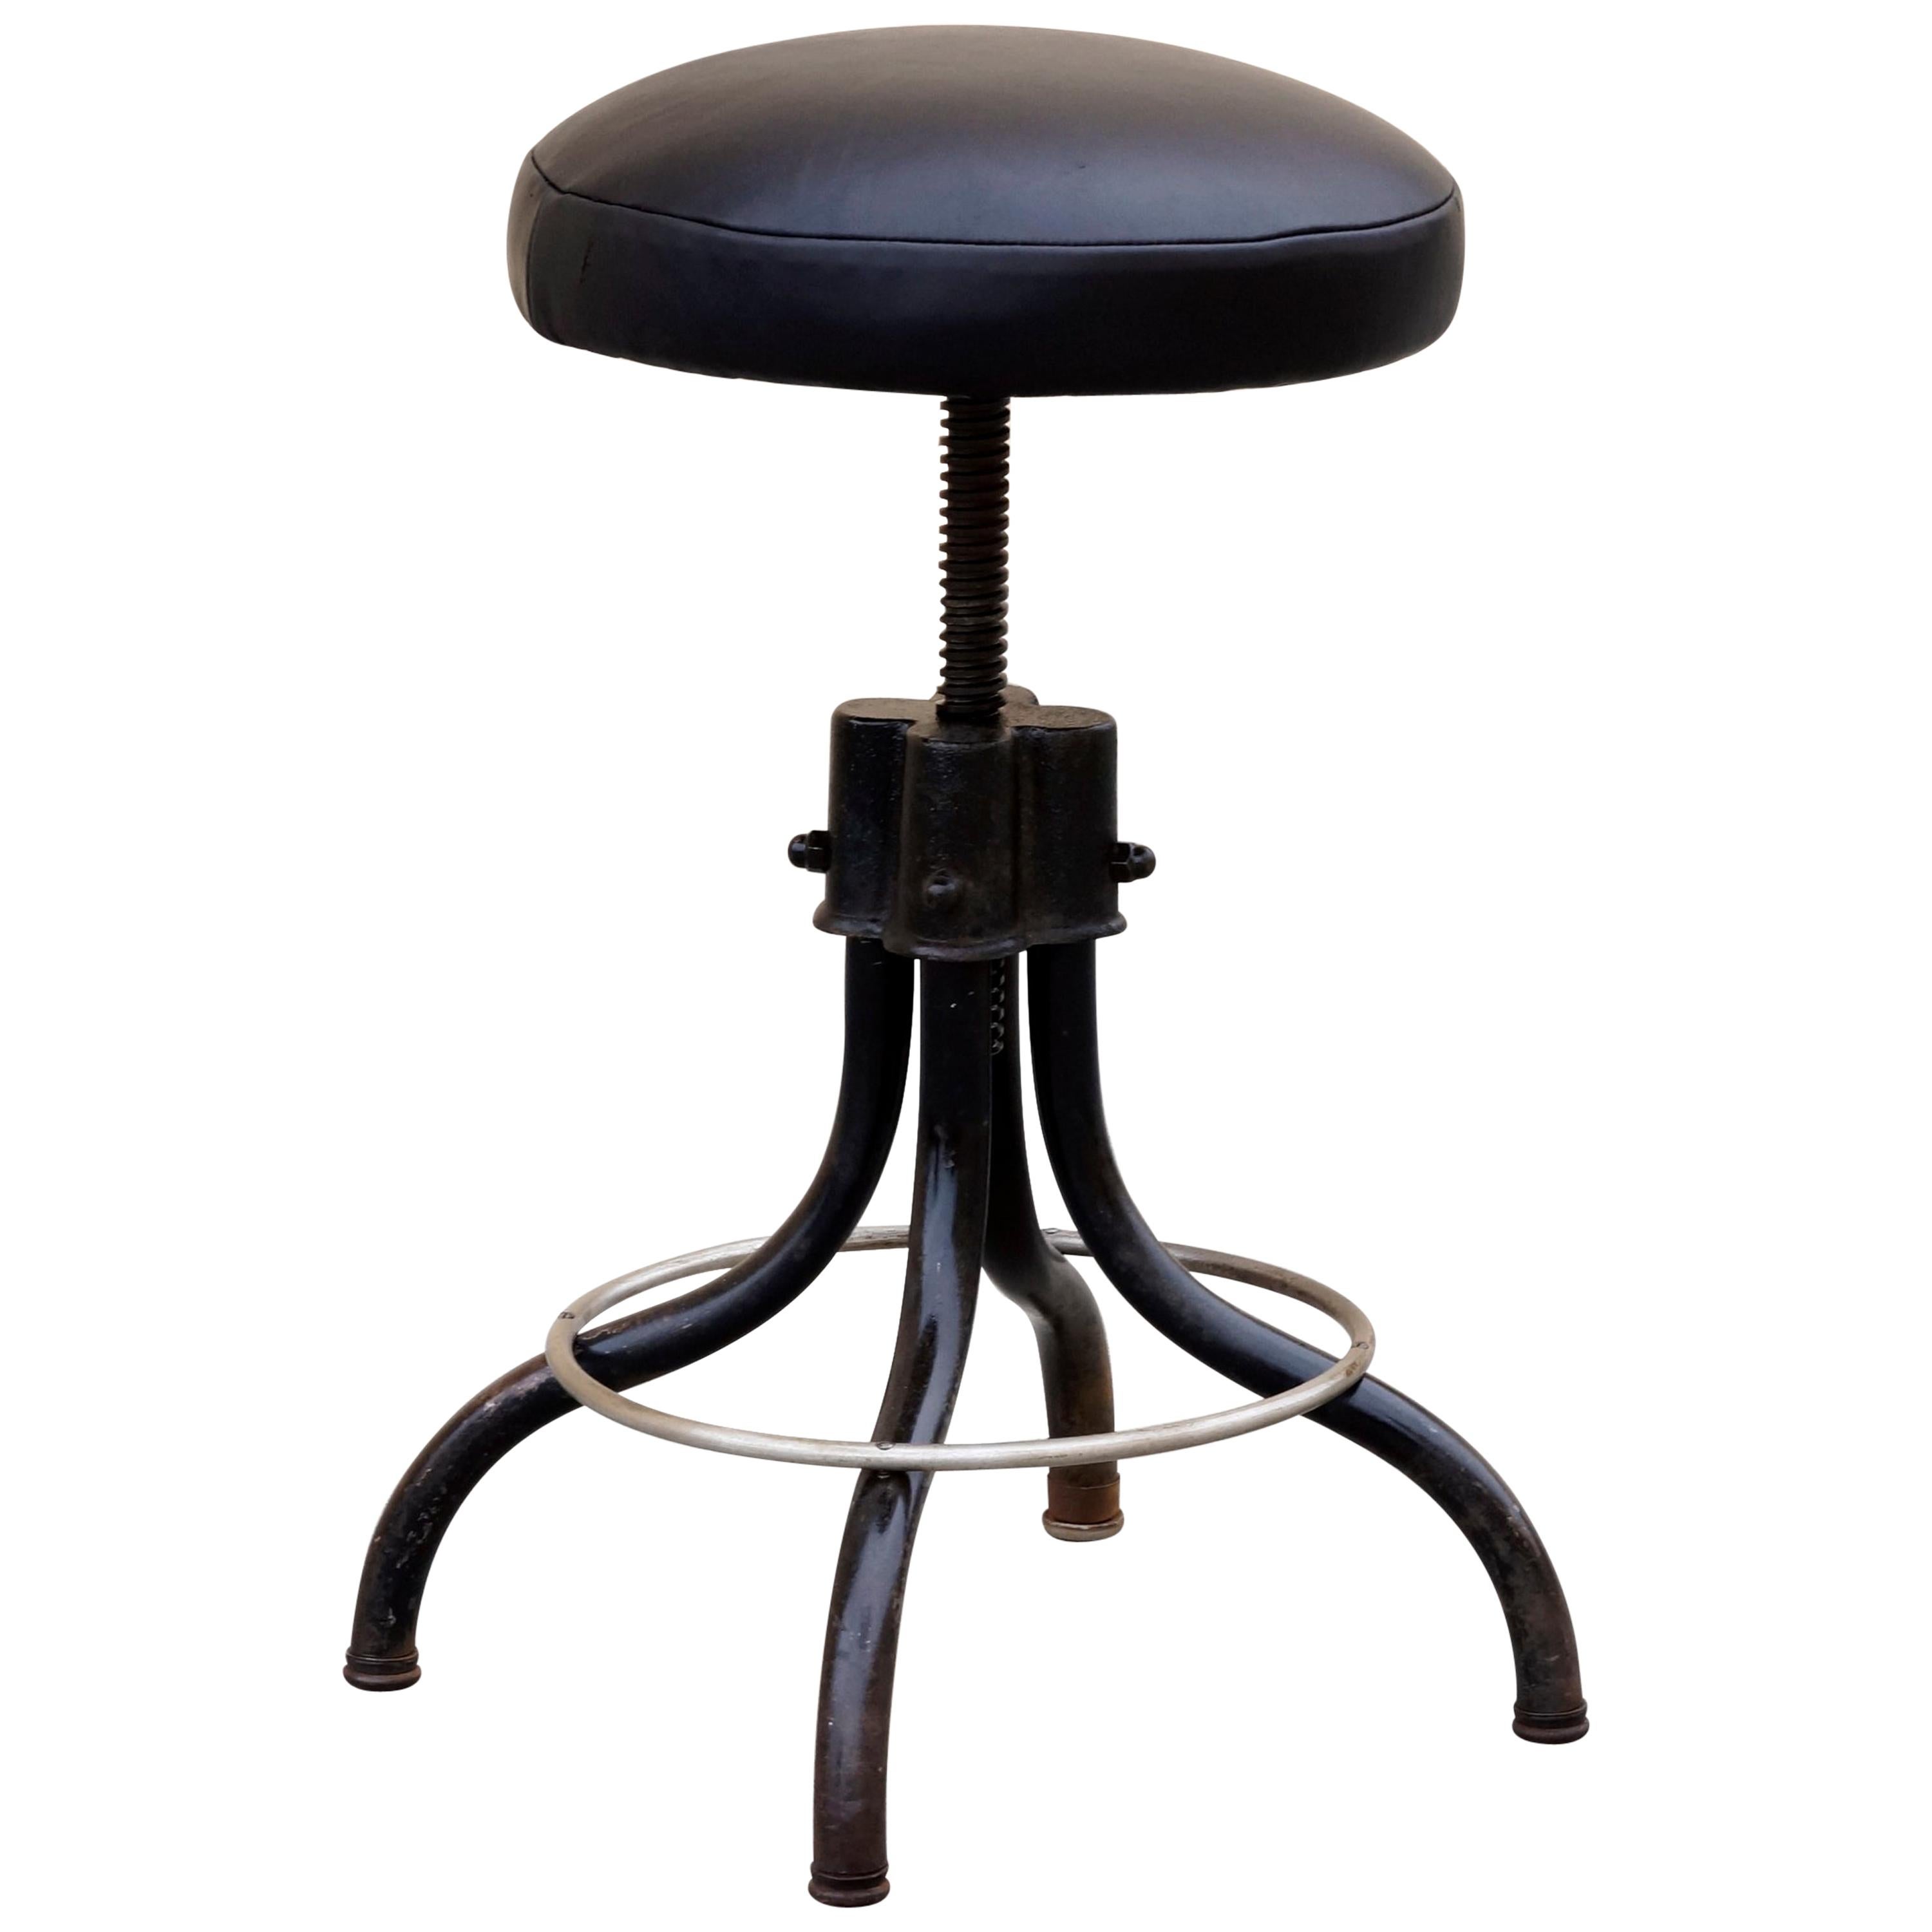 1960s Industrial Shop Stool, Refinished in Black on Black